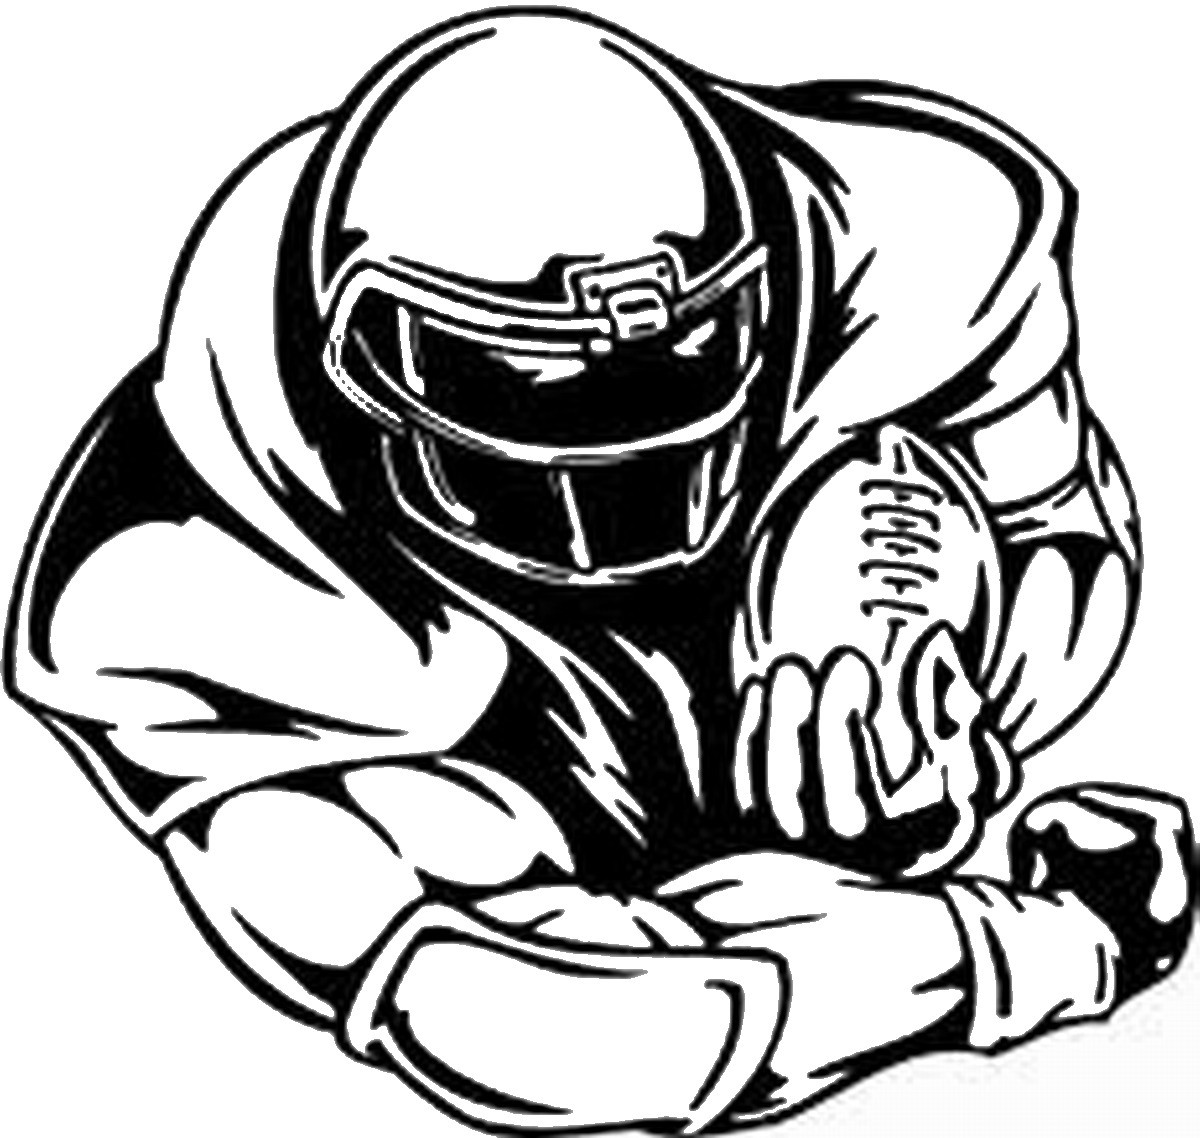 Cowboys Football Coloring Pages
 Football Coloring Pages